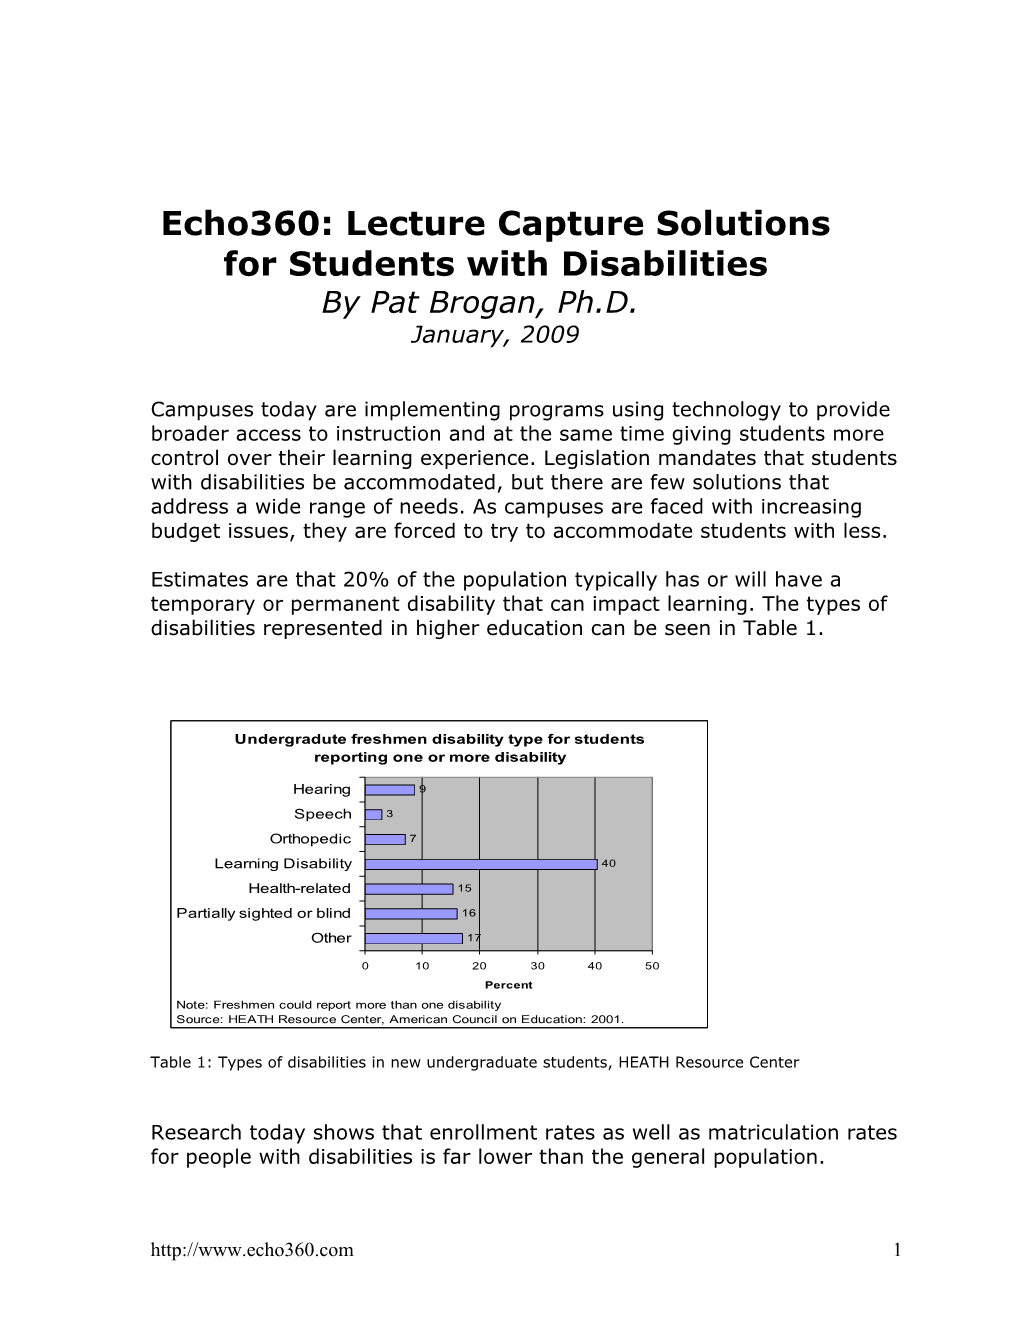 Echo360: Lecture Capture Solutions for Students with Disabilities by Pat Brogan, Ph.D